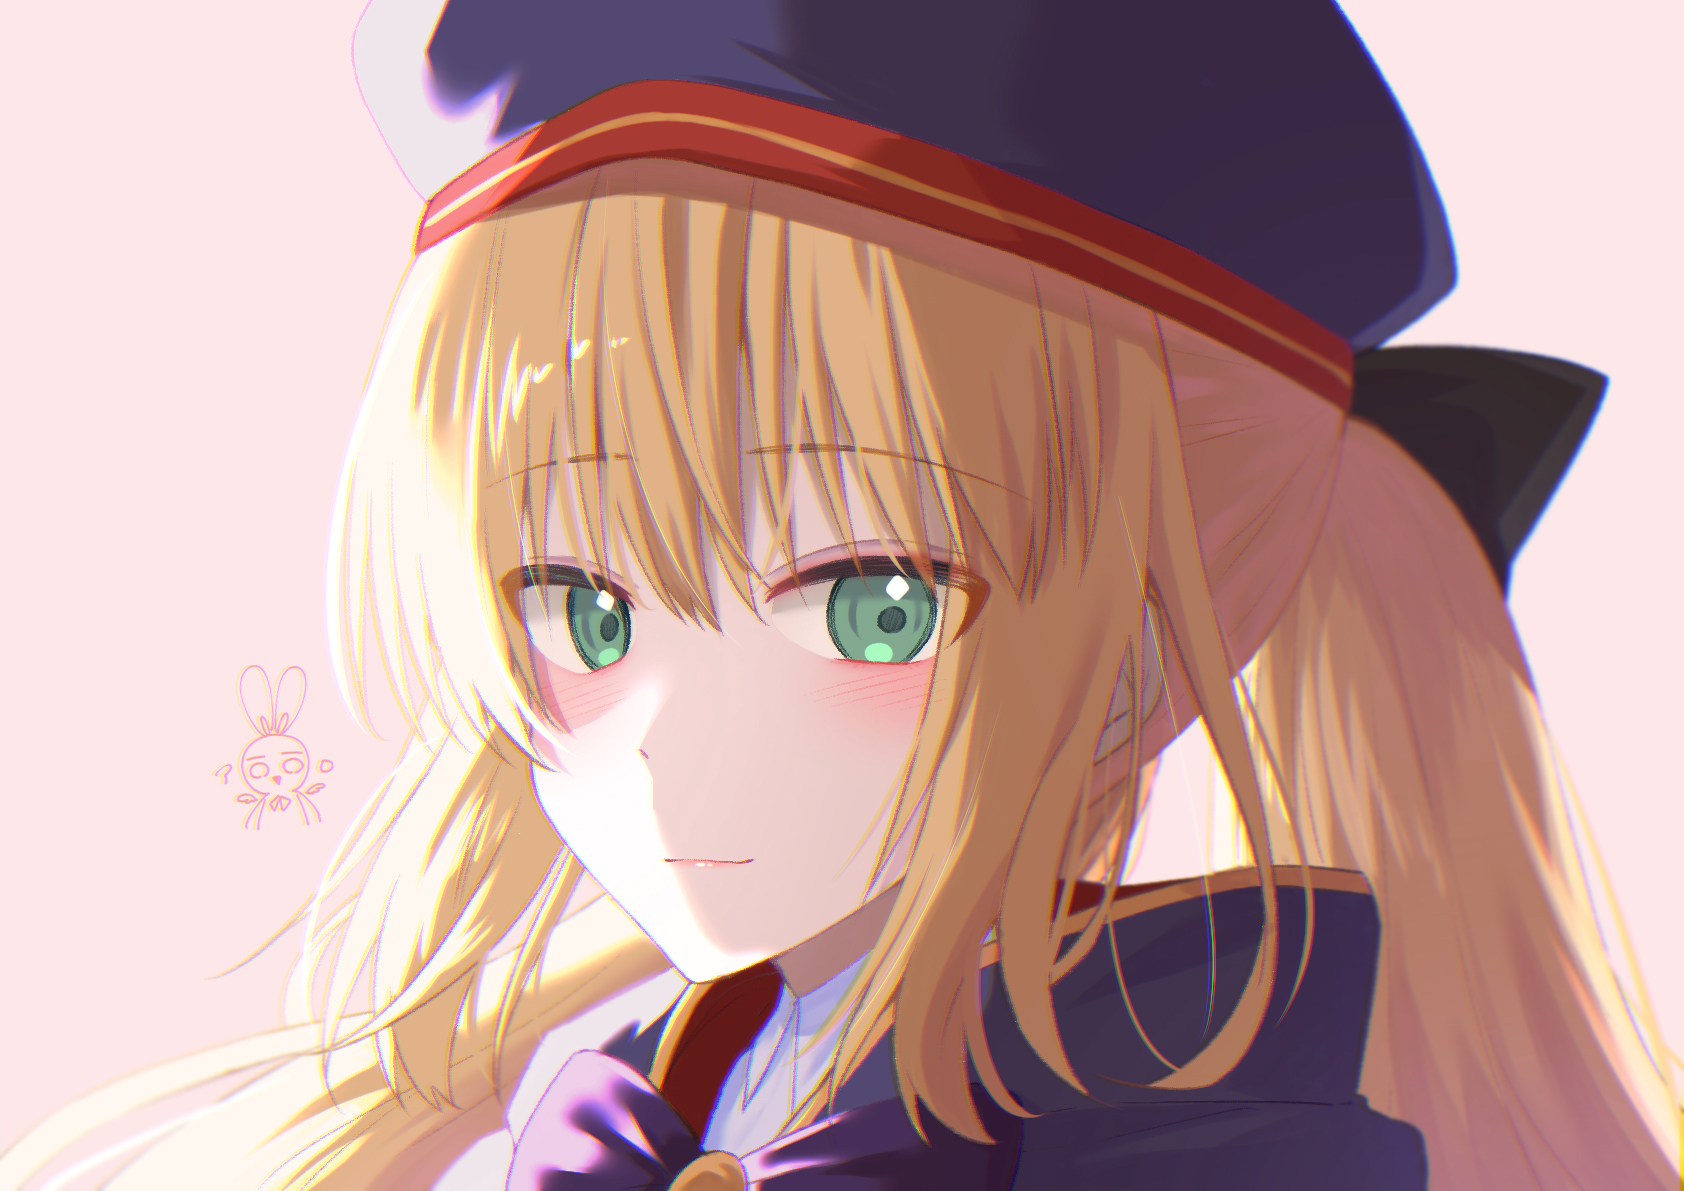 Anime 1684x1191 anime anime girls Fate series Fate/Grand Order Artoria Caster Artoria Pendragon long hair blonde solo artwork digital art fan art hat women with hats green eyes face closeup looking at viewer white background simple background